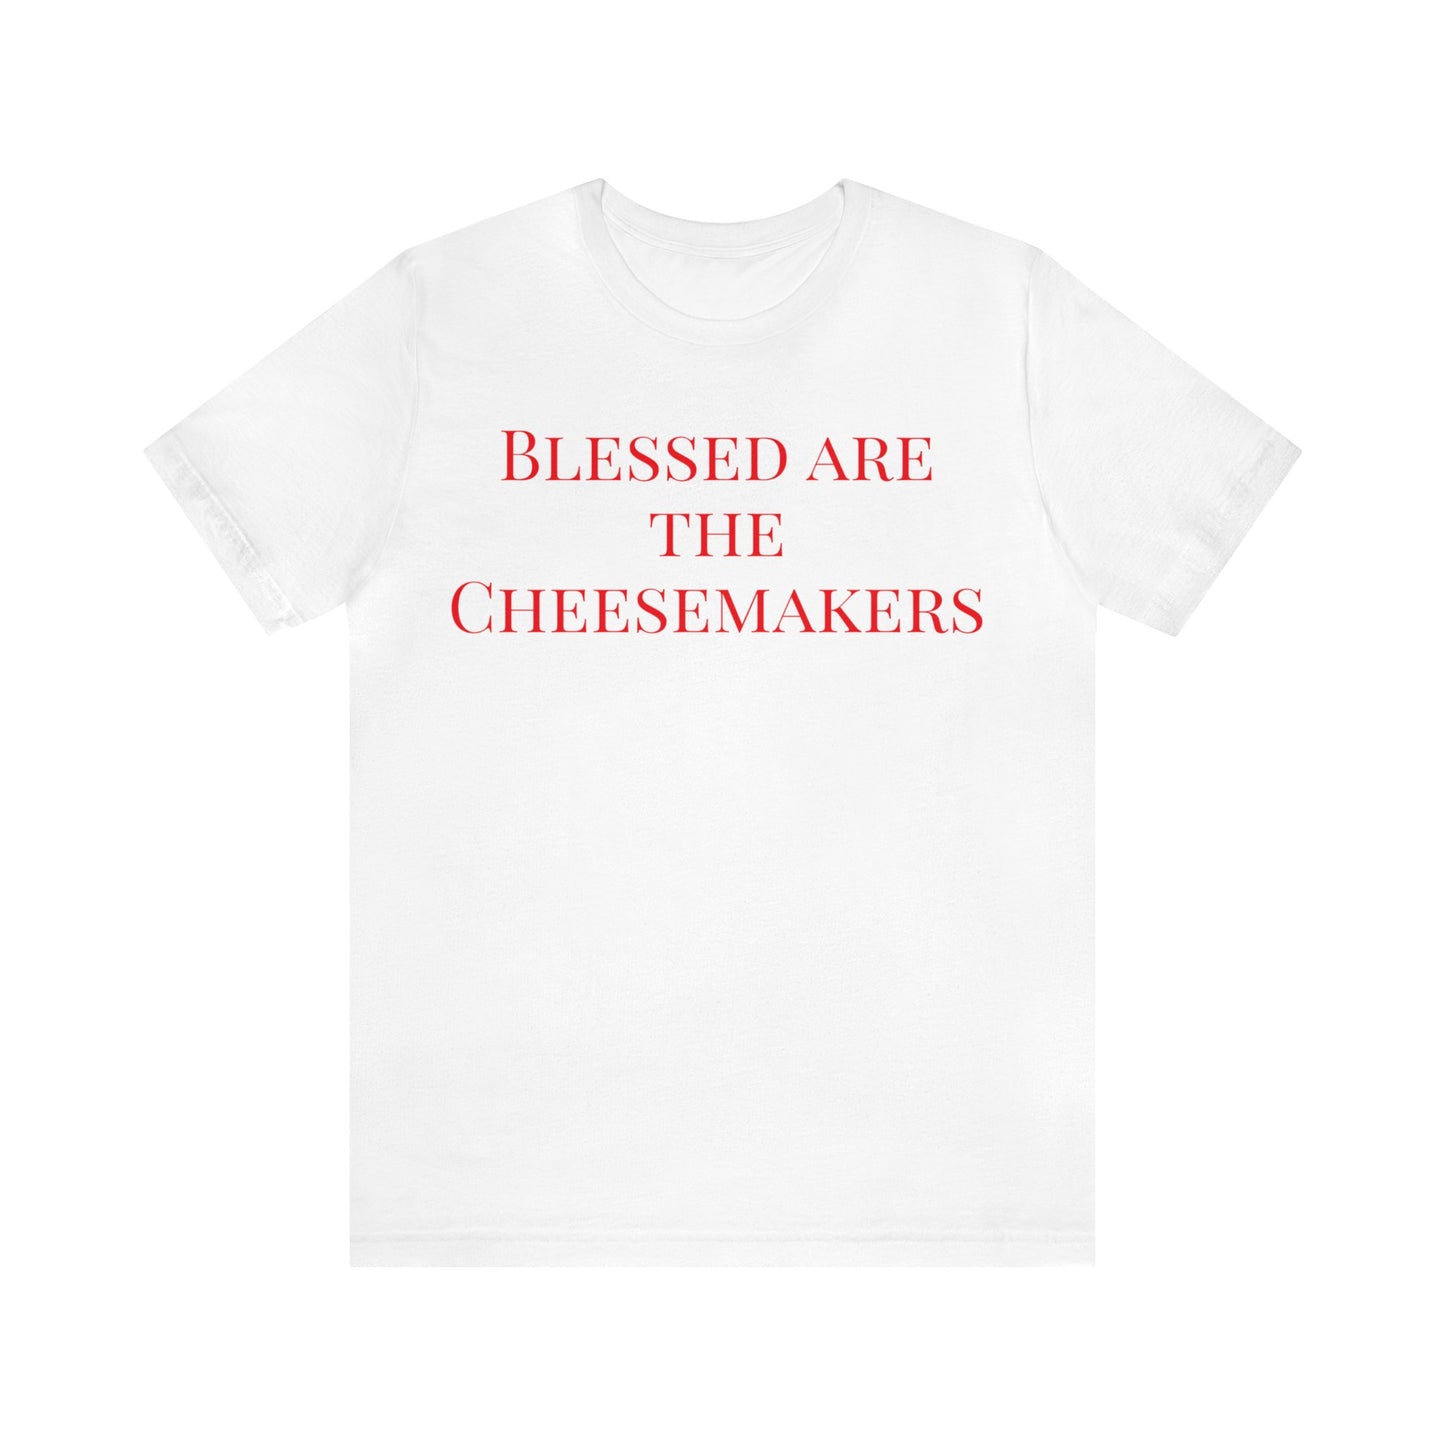 Blessed are the cheesemakers.